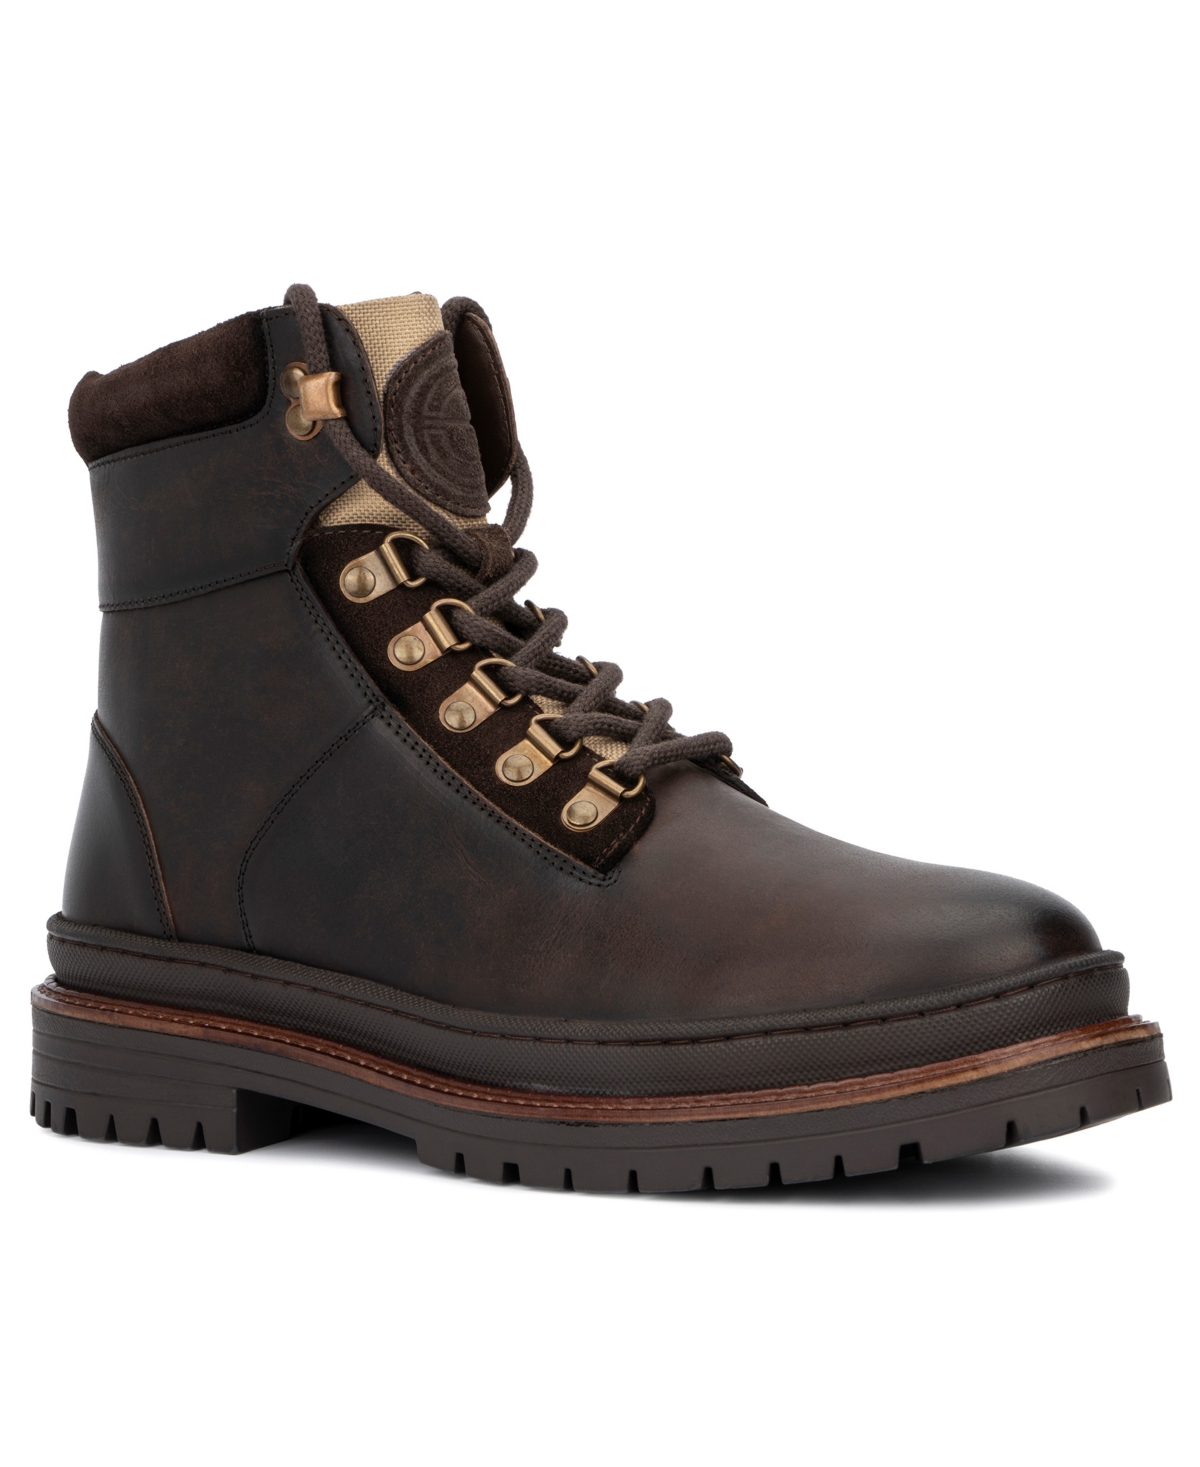 Men's Rafael Leather Boots - Brown